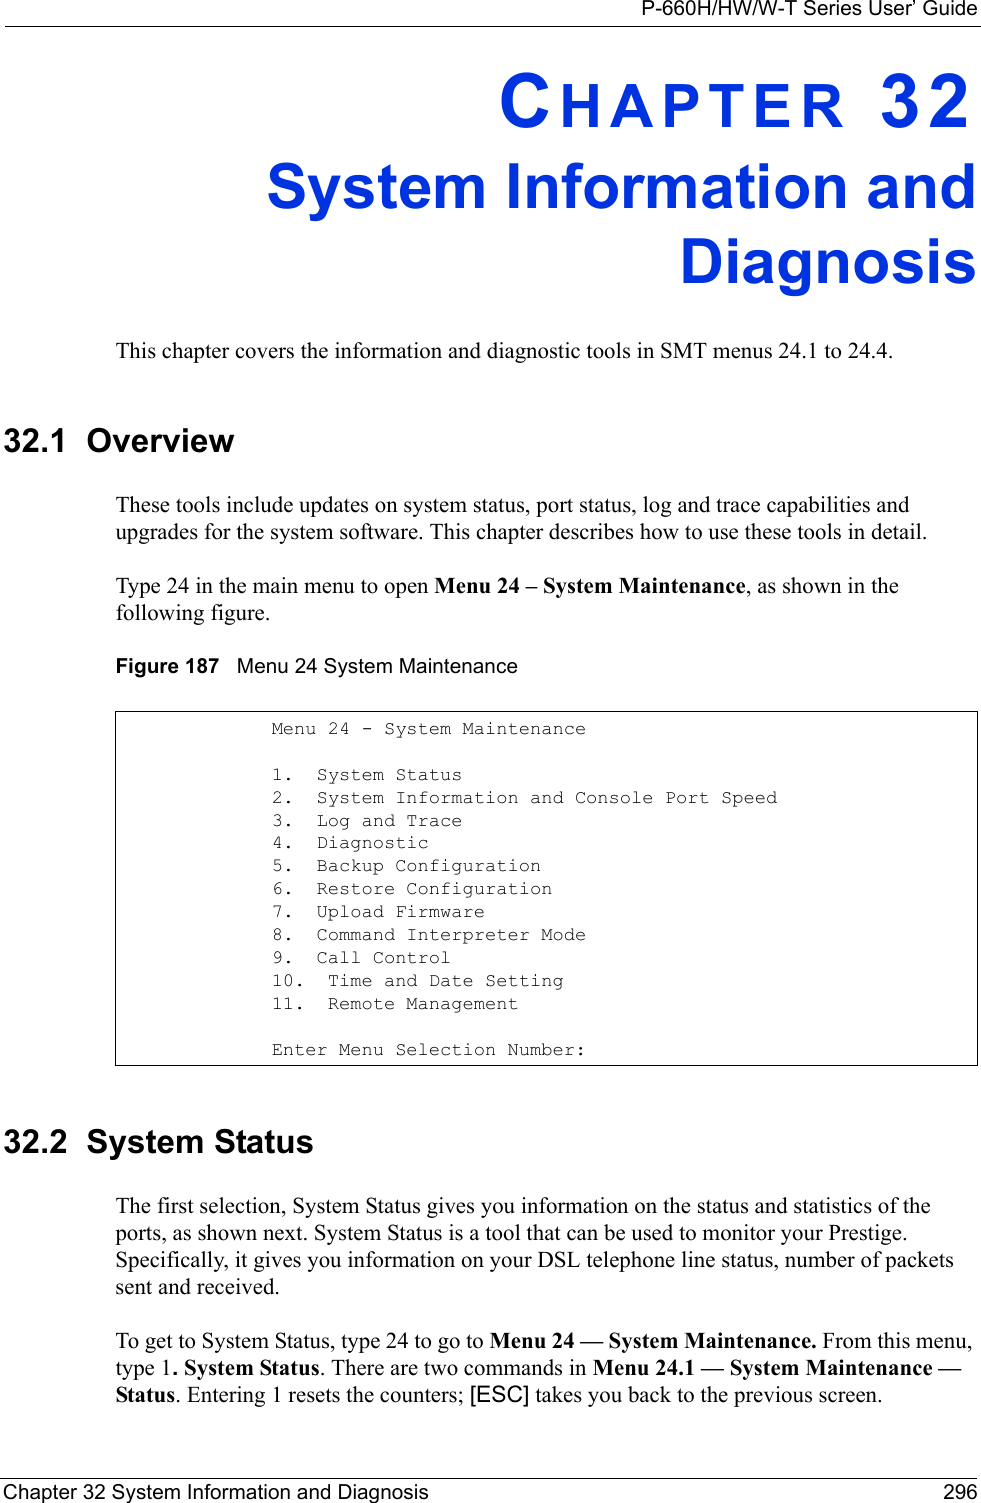 P-660H/HW/W-T Series User’ GuideChapter 32 System Information and Diagnosis 296CHAPTER 32System Information andDiagnosisThis chapter covers the information and diagnostic tools in SMT menus 24.1 to 24.4.32.1  OverviewThese tools include updates on system status, port status, log and trace capabilities and upgrades for the system software. This chapter describes how to use these tools in detail.Type 24 in the main menu to open Menu 24 – System Maintenance, as shown in the following figure.Figure 187   Menu 24 System Maintenance32.2  System StatusThe first selection, System Status gives you information on the status and statistics of the ports, as shown next. System Status is a tool that can be used to monitor your Prestige. Specifically, it gives you information on your DSL telephone line status, number of packets sent and received.To get to System Status, type 24 to go to Menu 24 — System Maintenance. From this menu, type 1. System Status. There are two commands in Menu 24.1 — System Maintenance — Status. Entering 1 resets the counters; [ESC] takes you back to the previous screen.Menu 24 - System Maintenance1.  System Status2.  System Information and Console Port Speed3.  Log and Trace4.  Diagnostic5.  Backup Configuration6.  Restore Configuration7.  Upload Firmware8.  Command Interpreter Mode9.  Call Control10.  Time and Date Setting11.  Remote Management      Enter Menu Selection Number: